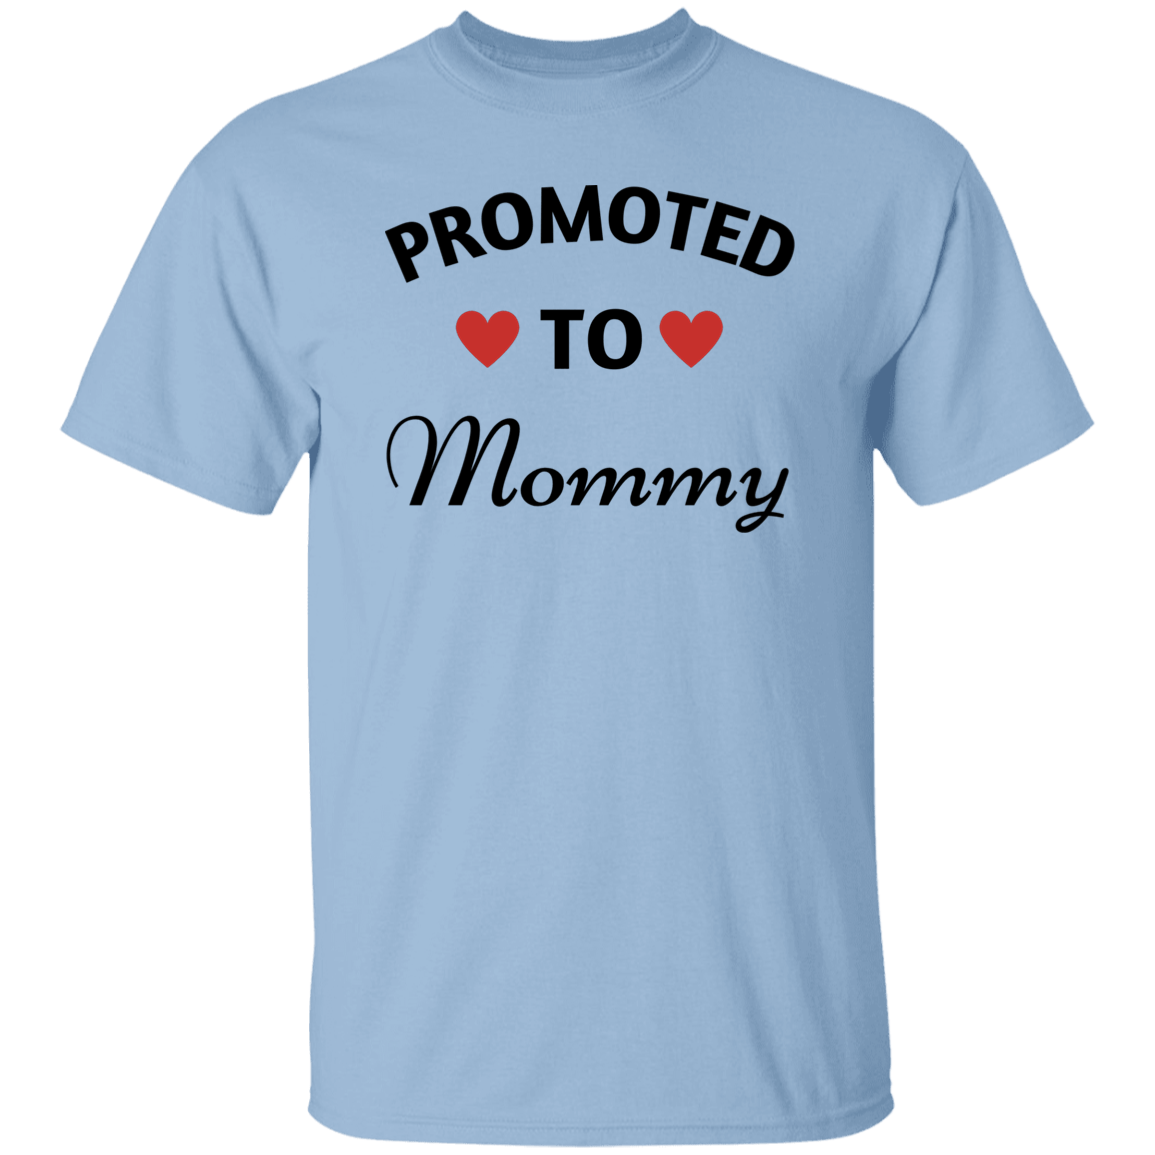 Promoted to Mommy T-Shirt